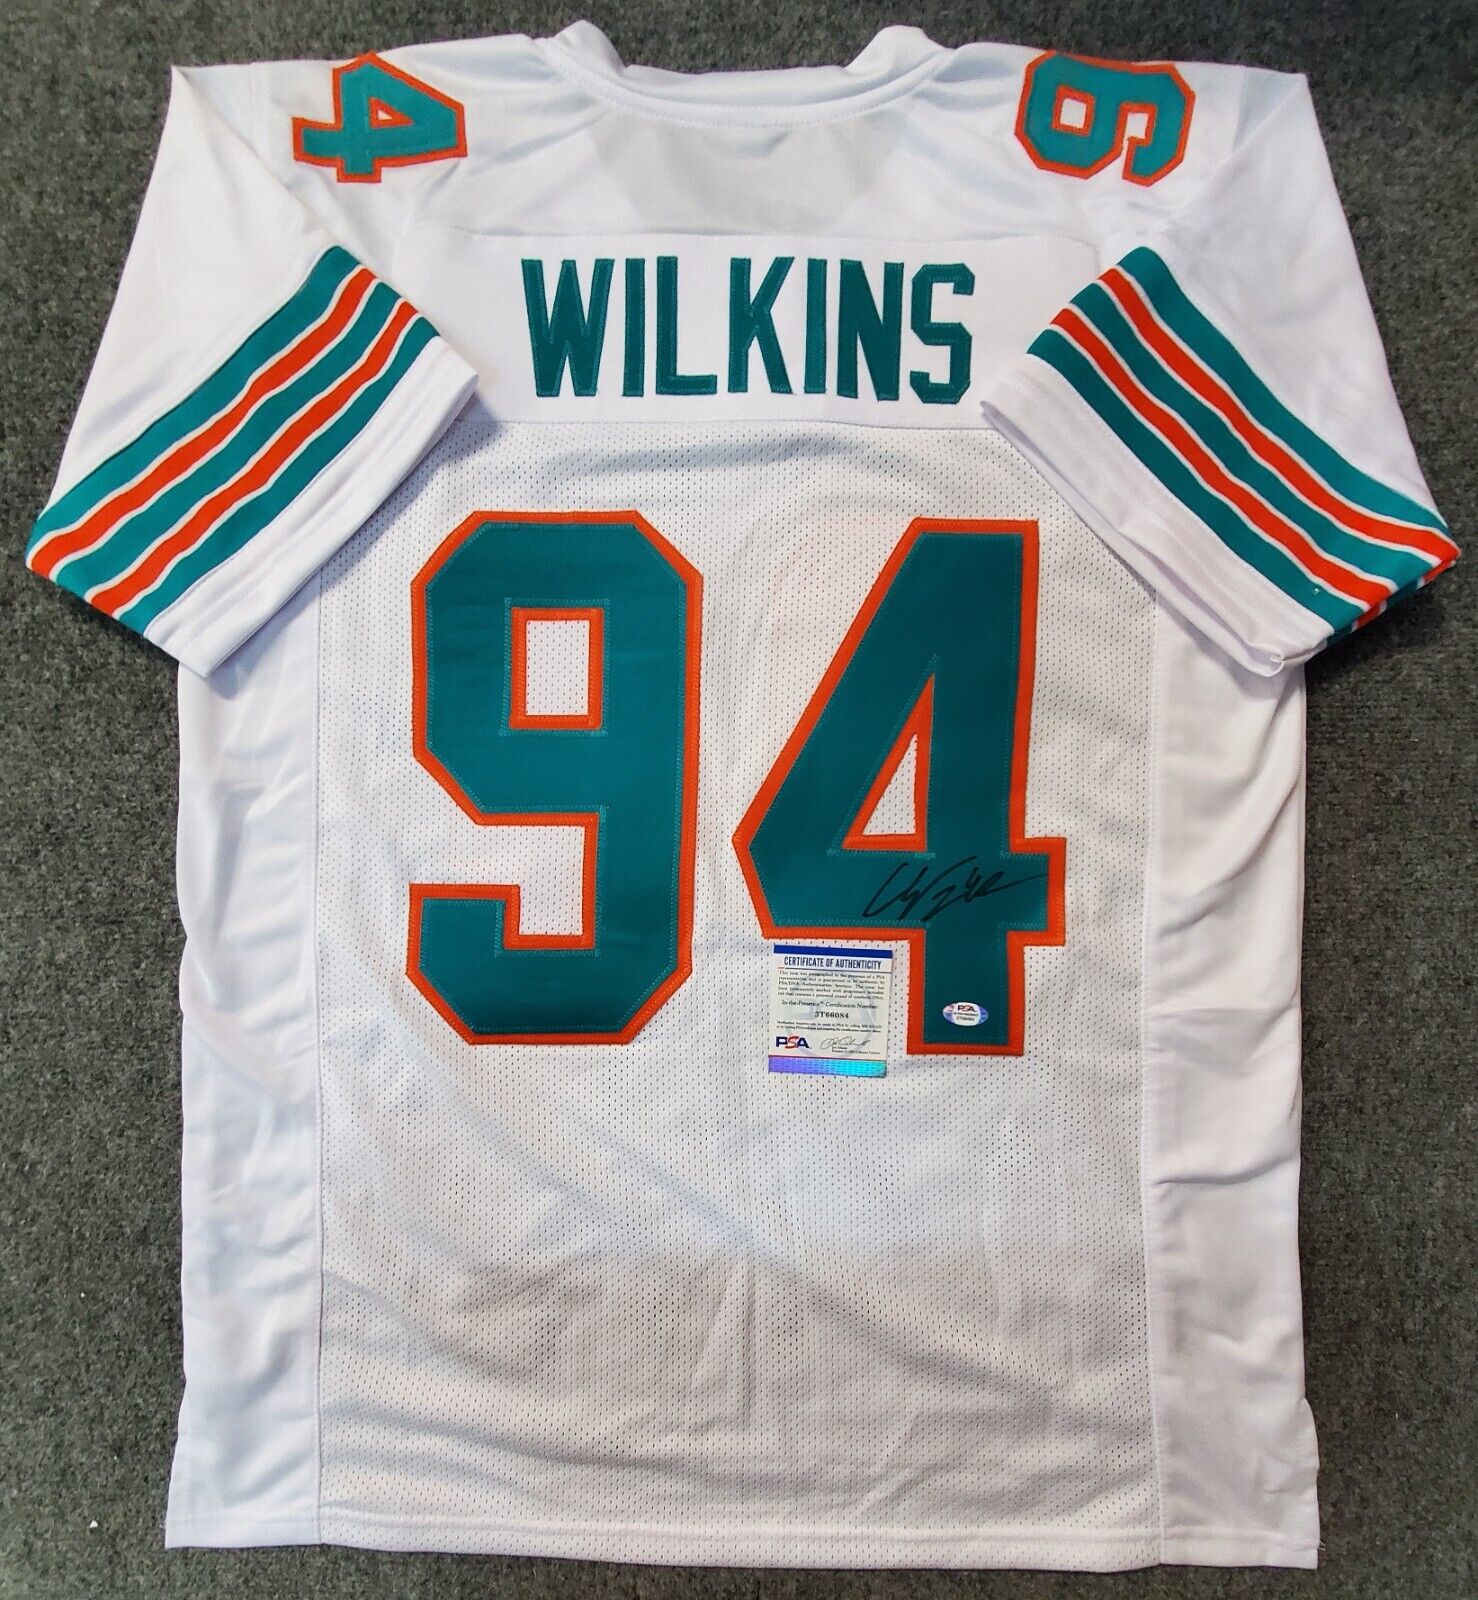 MVP Authentics Miami Dolphins Christian Wilkins Autographed Signed Jersey Psa Coa 99 sports jersey framing , jersey framing